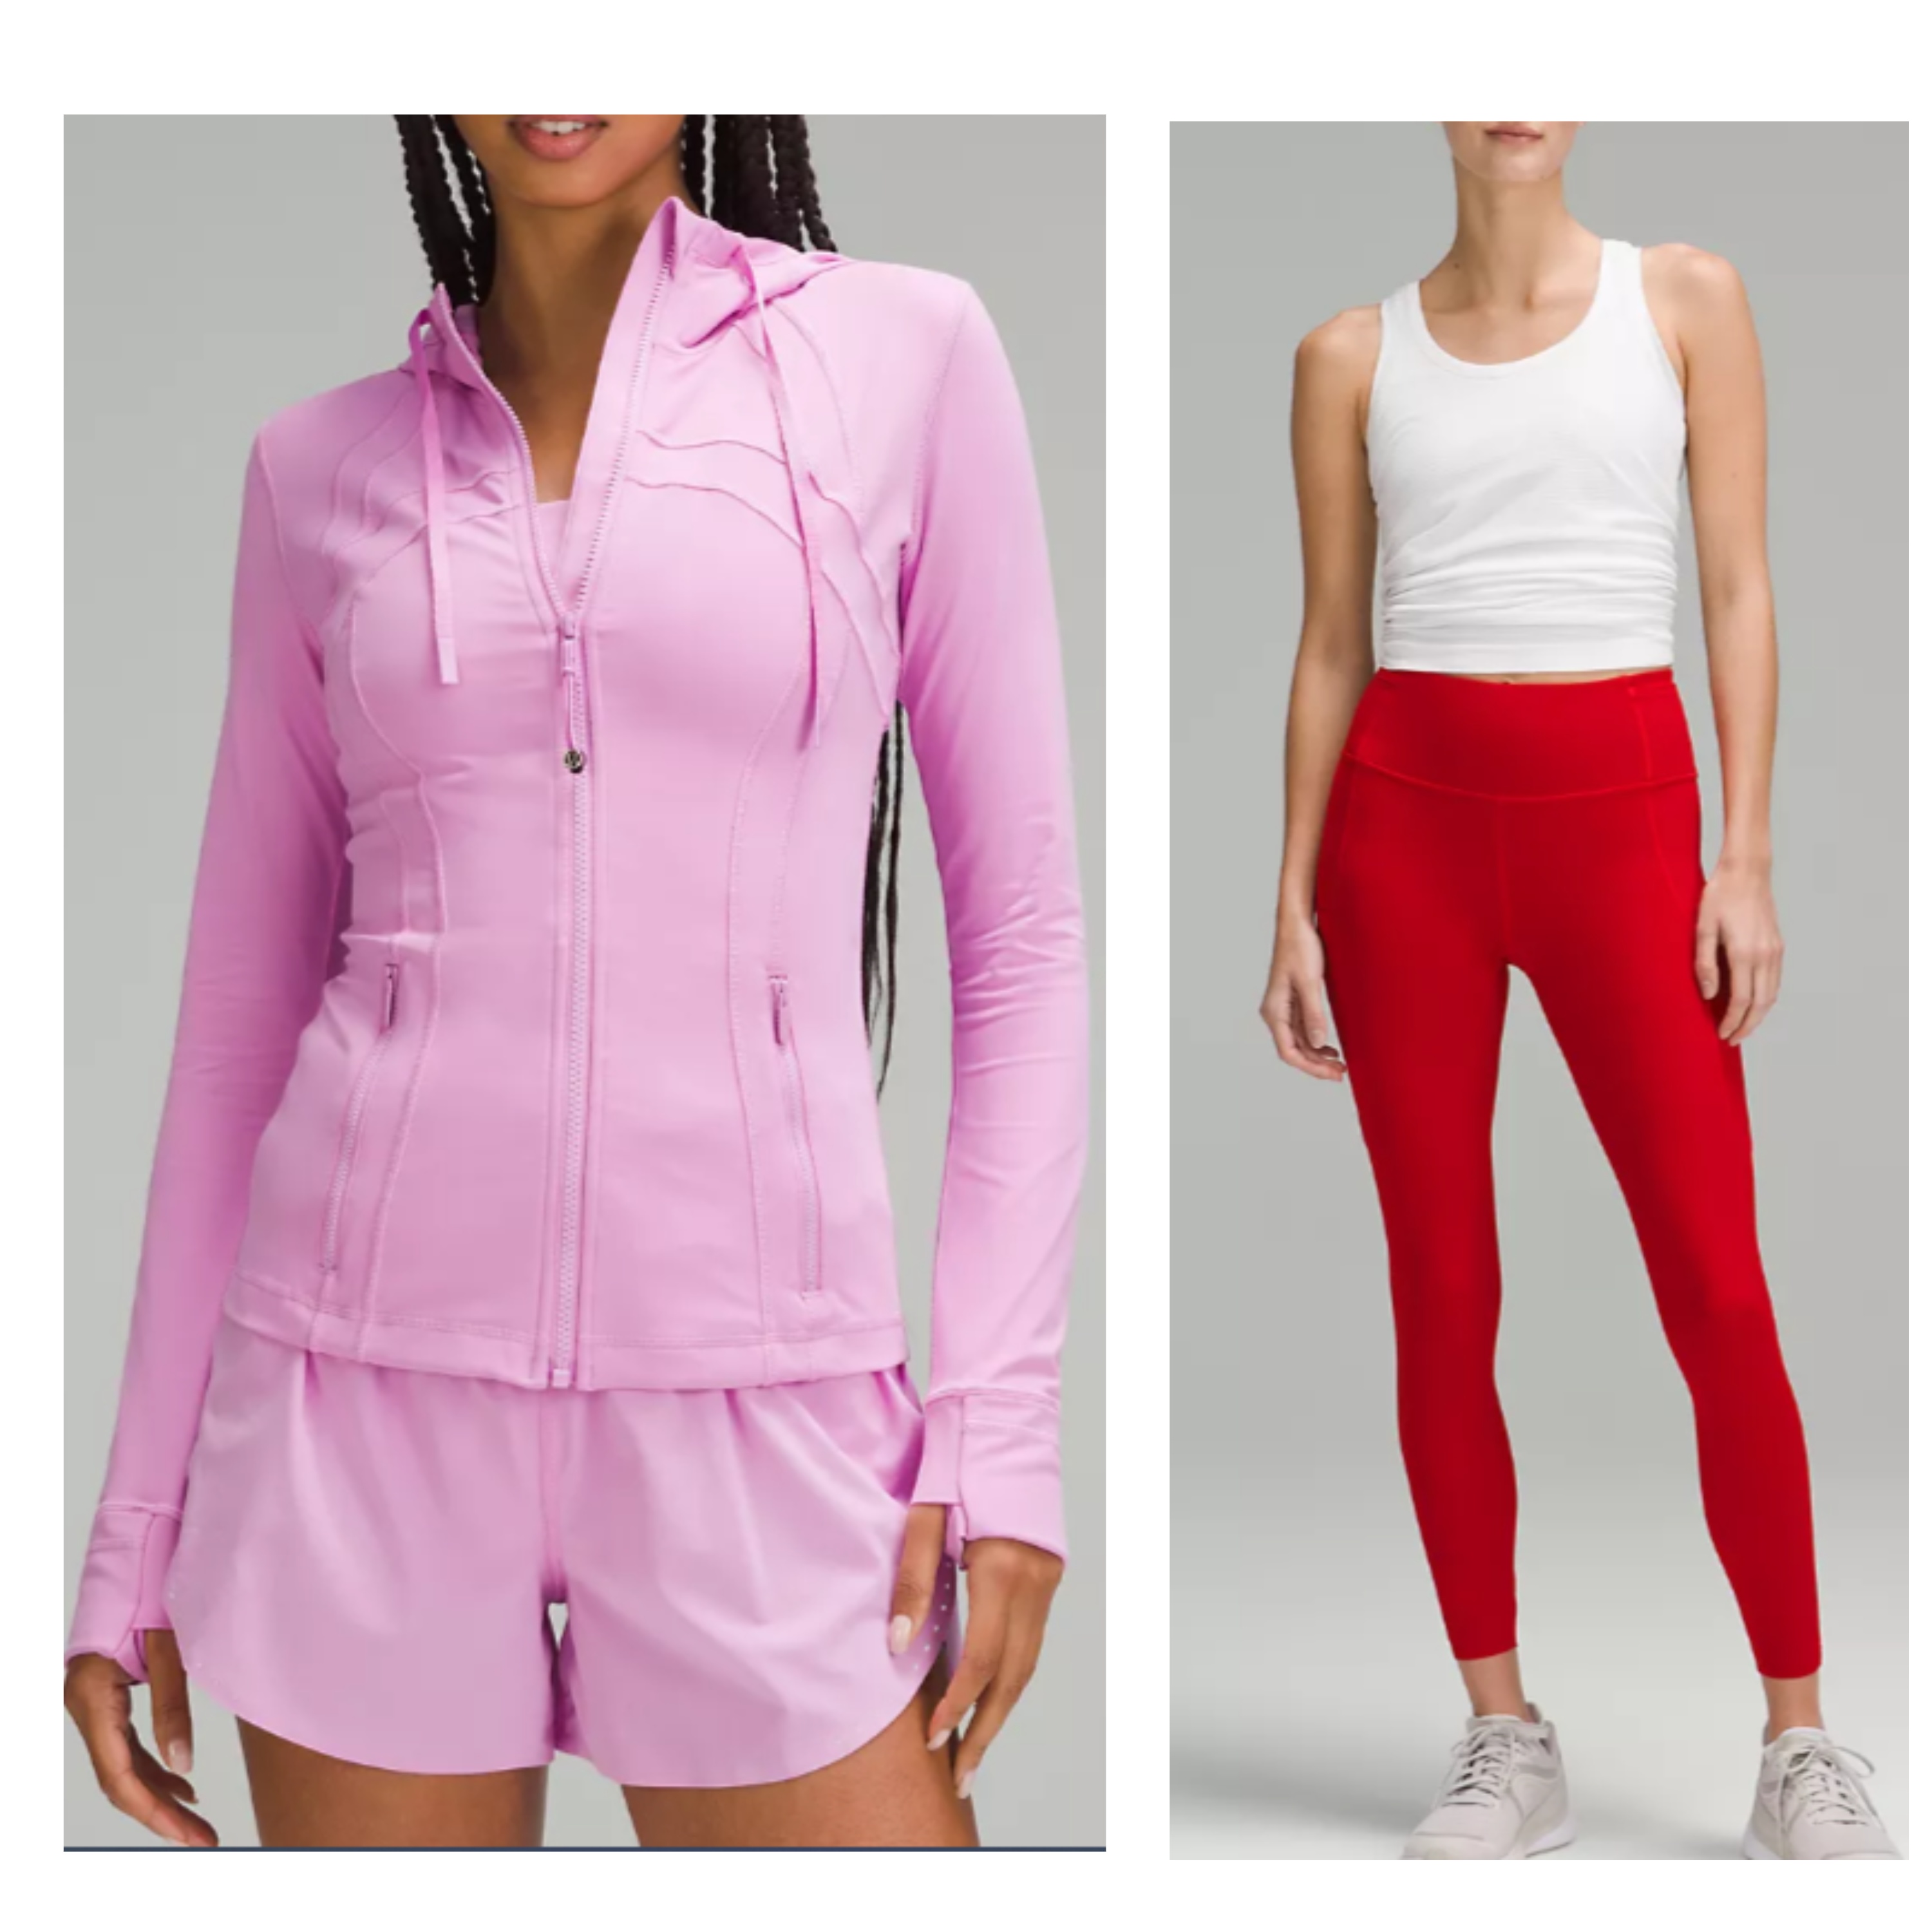 How to get up to 53% off Lululemon spring clothing 